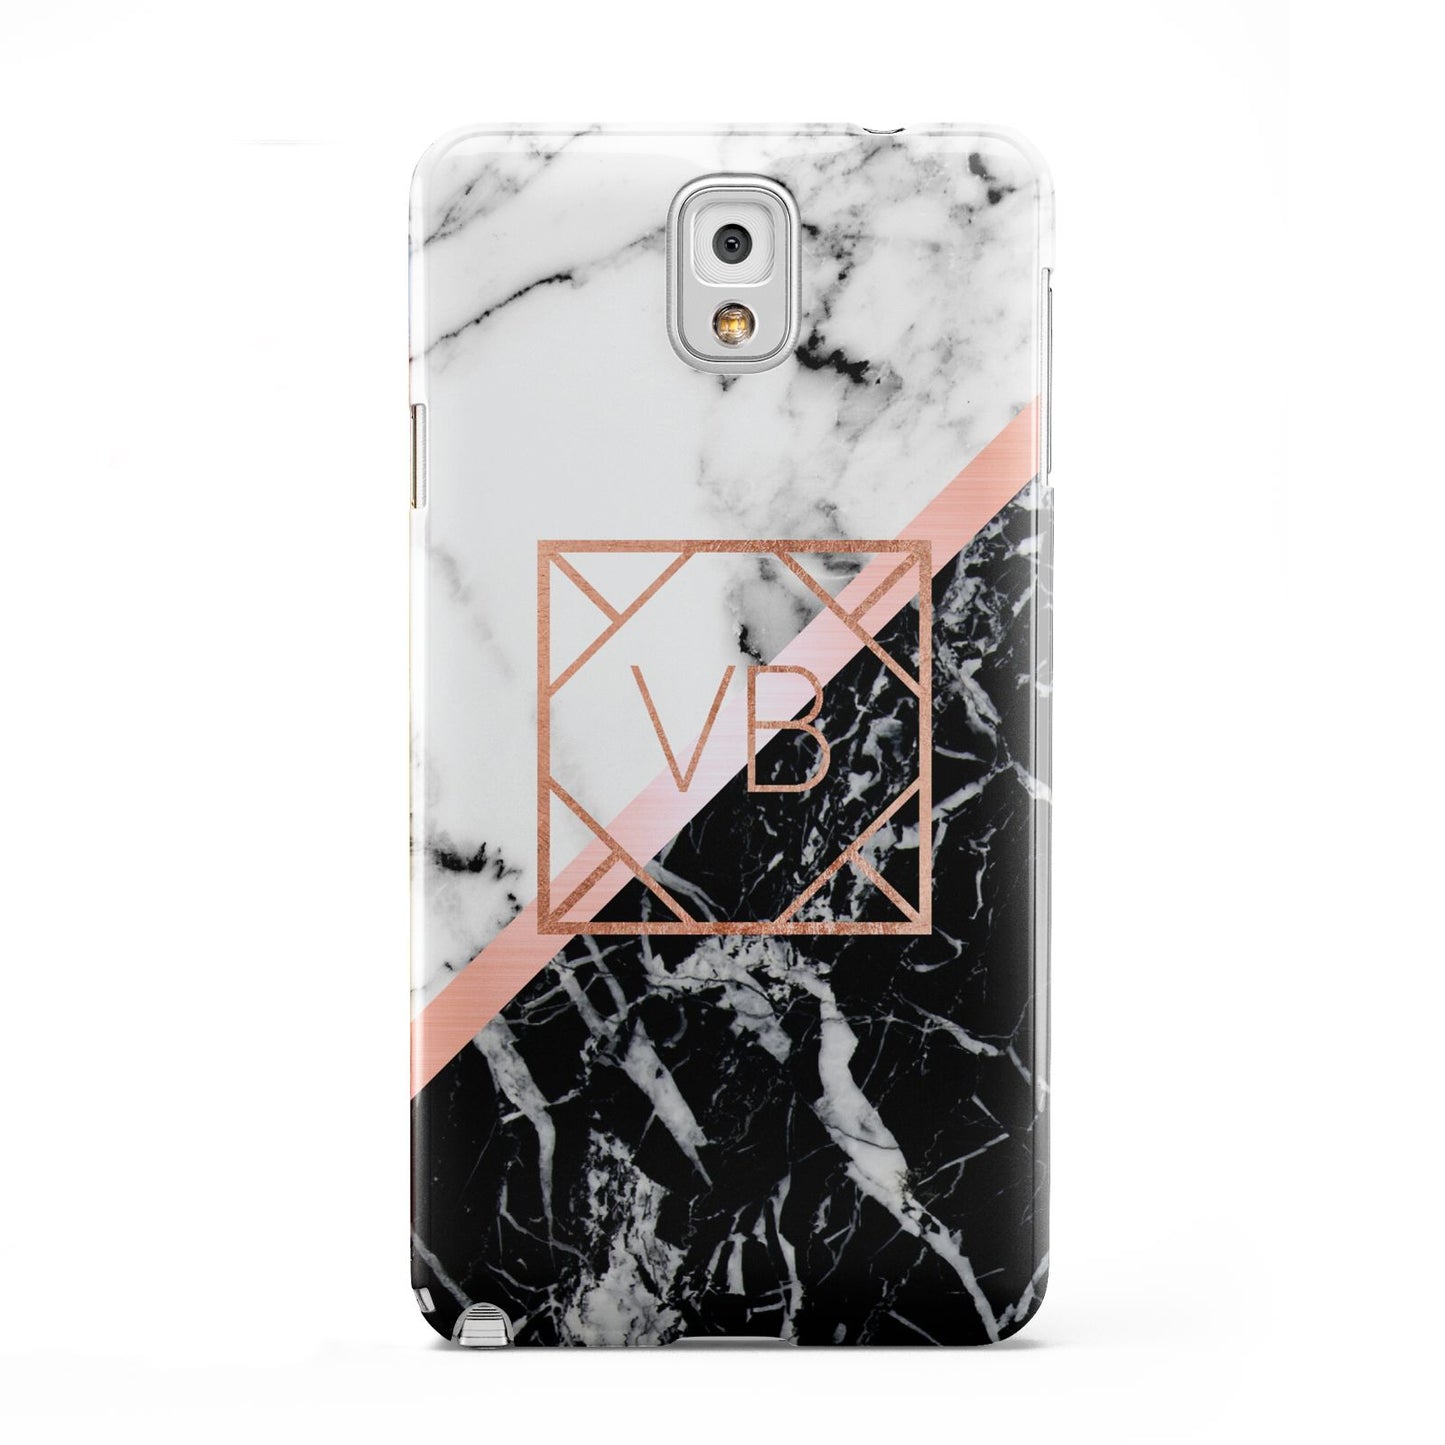 Personalised Rose Gold With Marble Initials Samsung Galaxy Note 3 Case